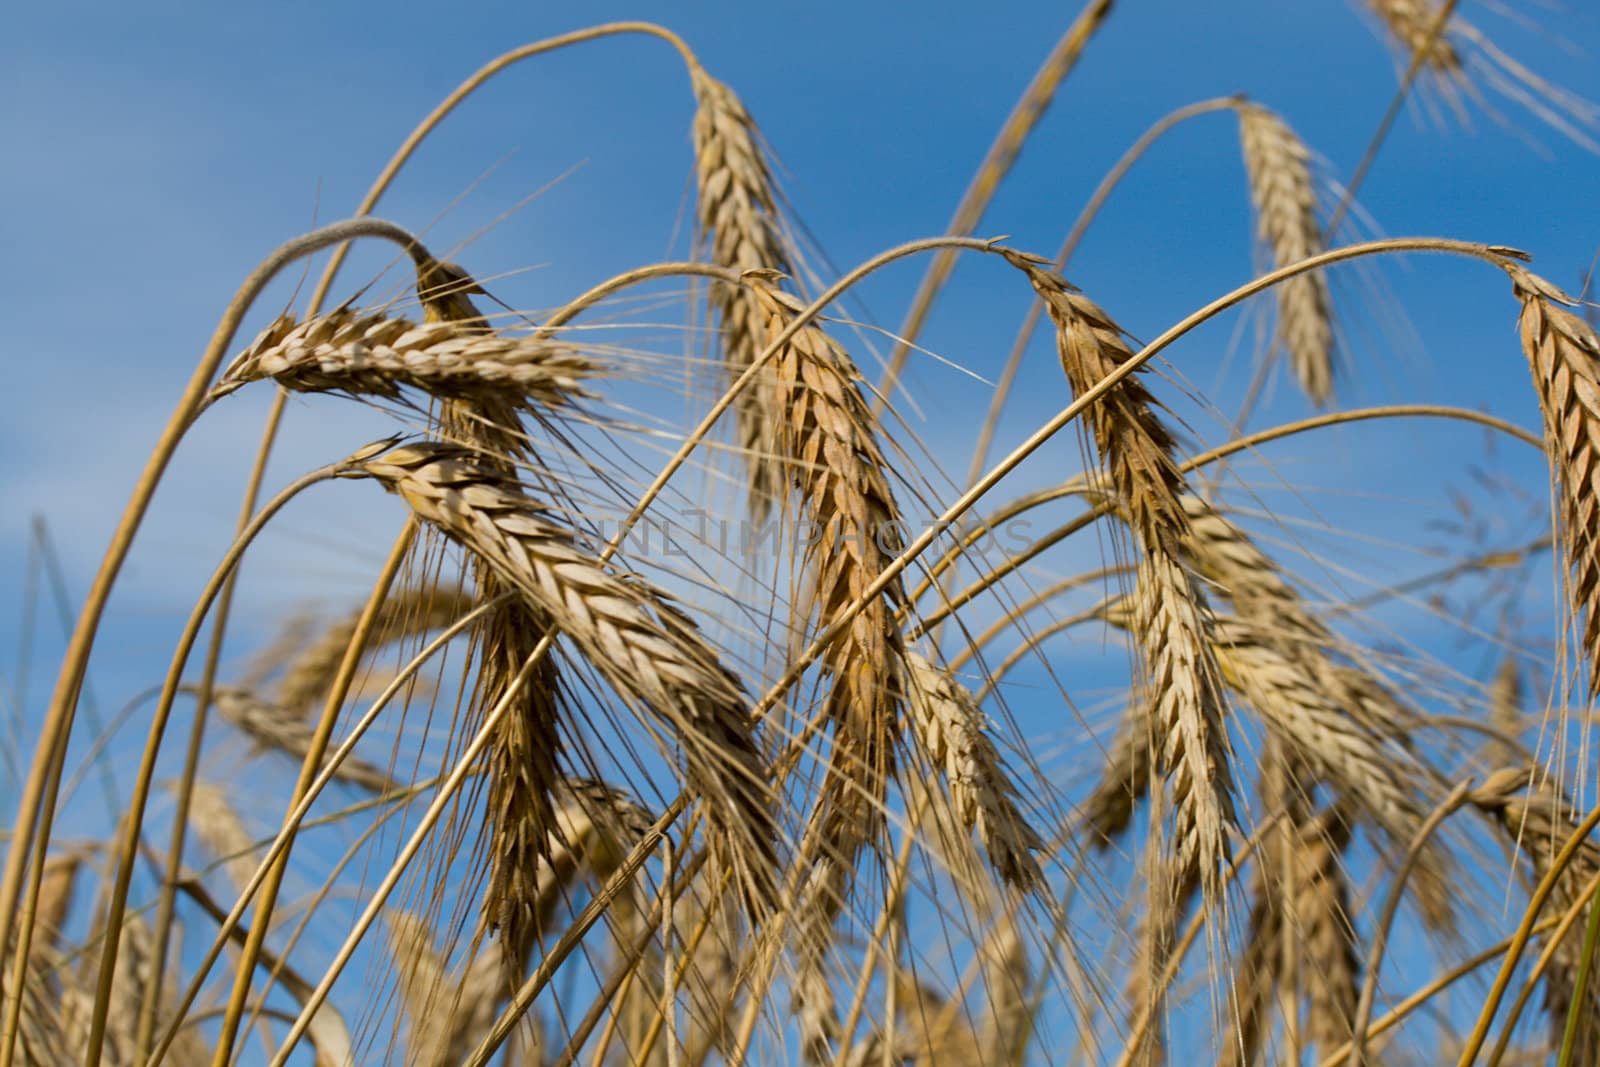 close-up wheat on blue sky background